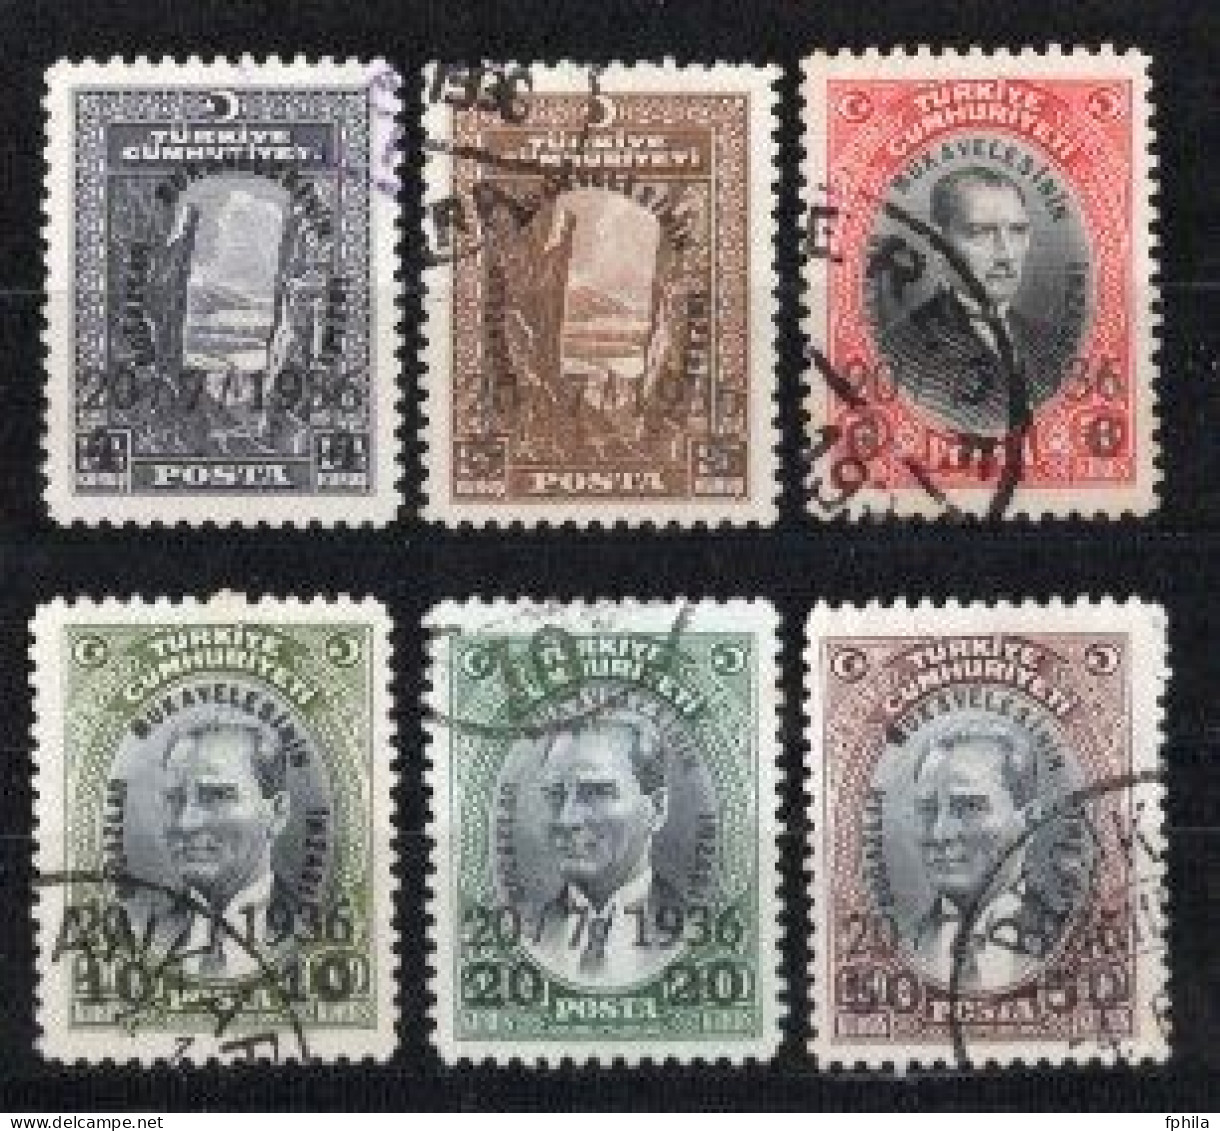 1936 TURKEY SURCHARGED COMMEMORATIVE STAMPS FOR THE SIGNATURE OF THE STRAITS SETTLEMENT USED - Oblitérés